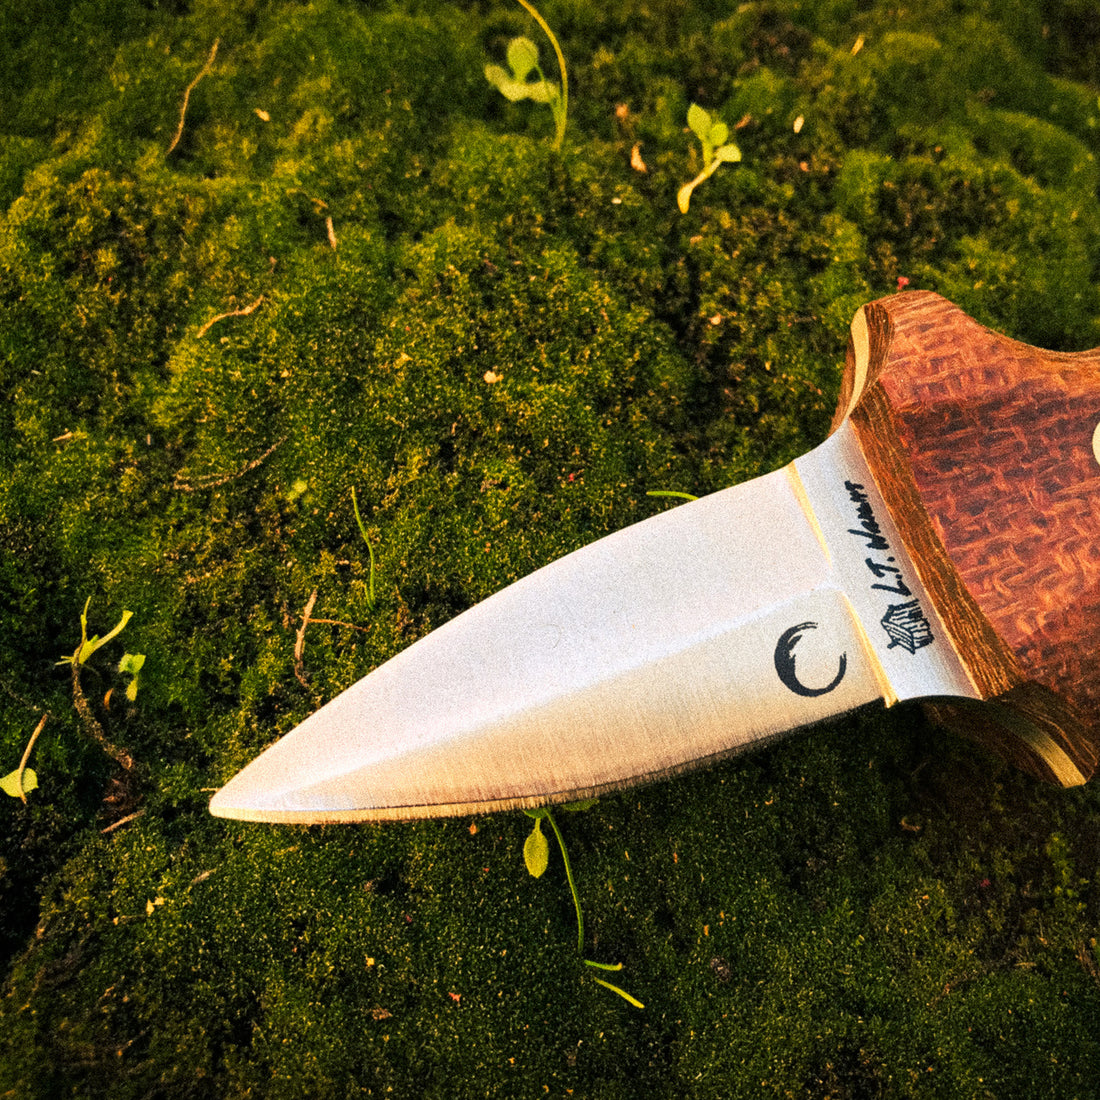 Chef Paul's Wild Harvest Oyster Knife